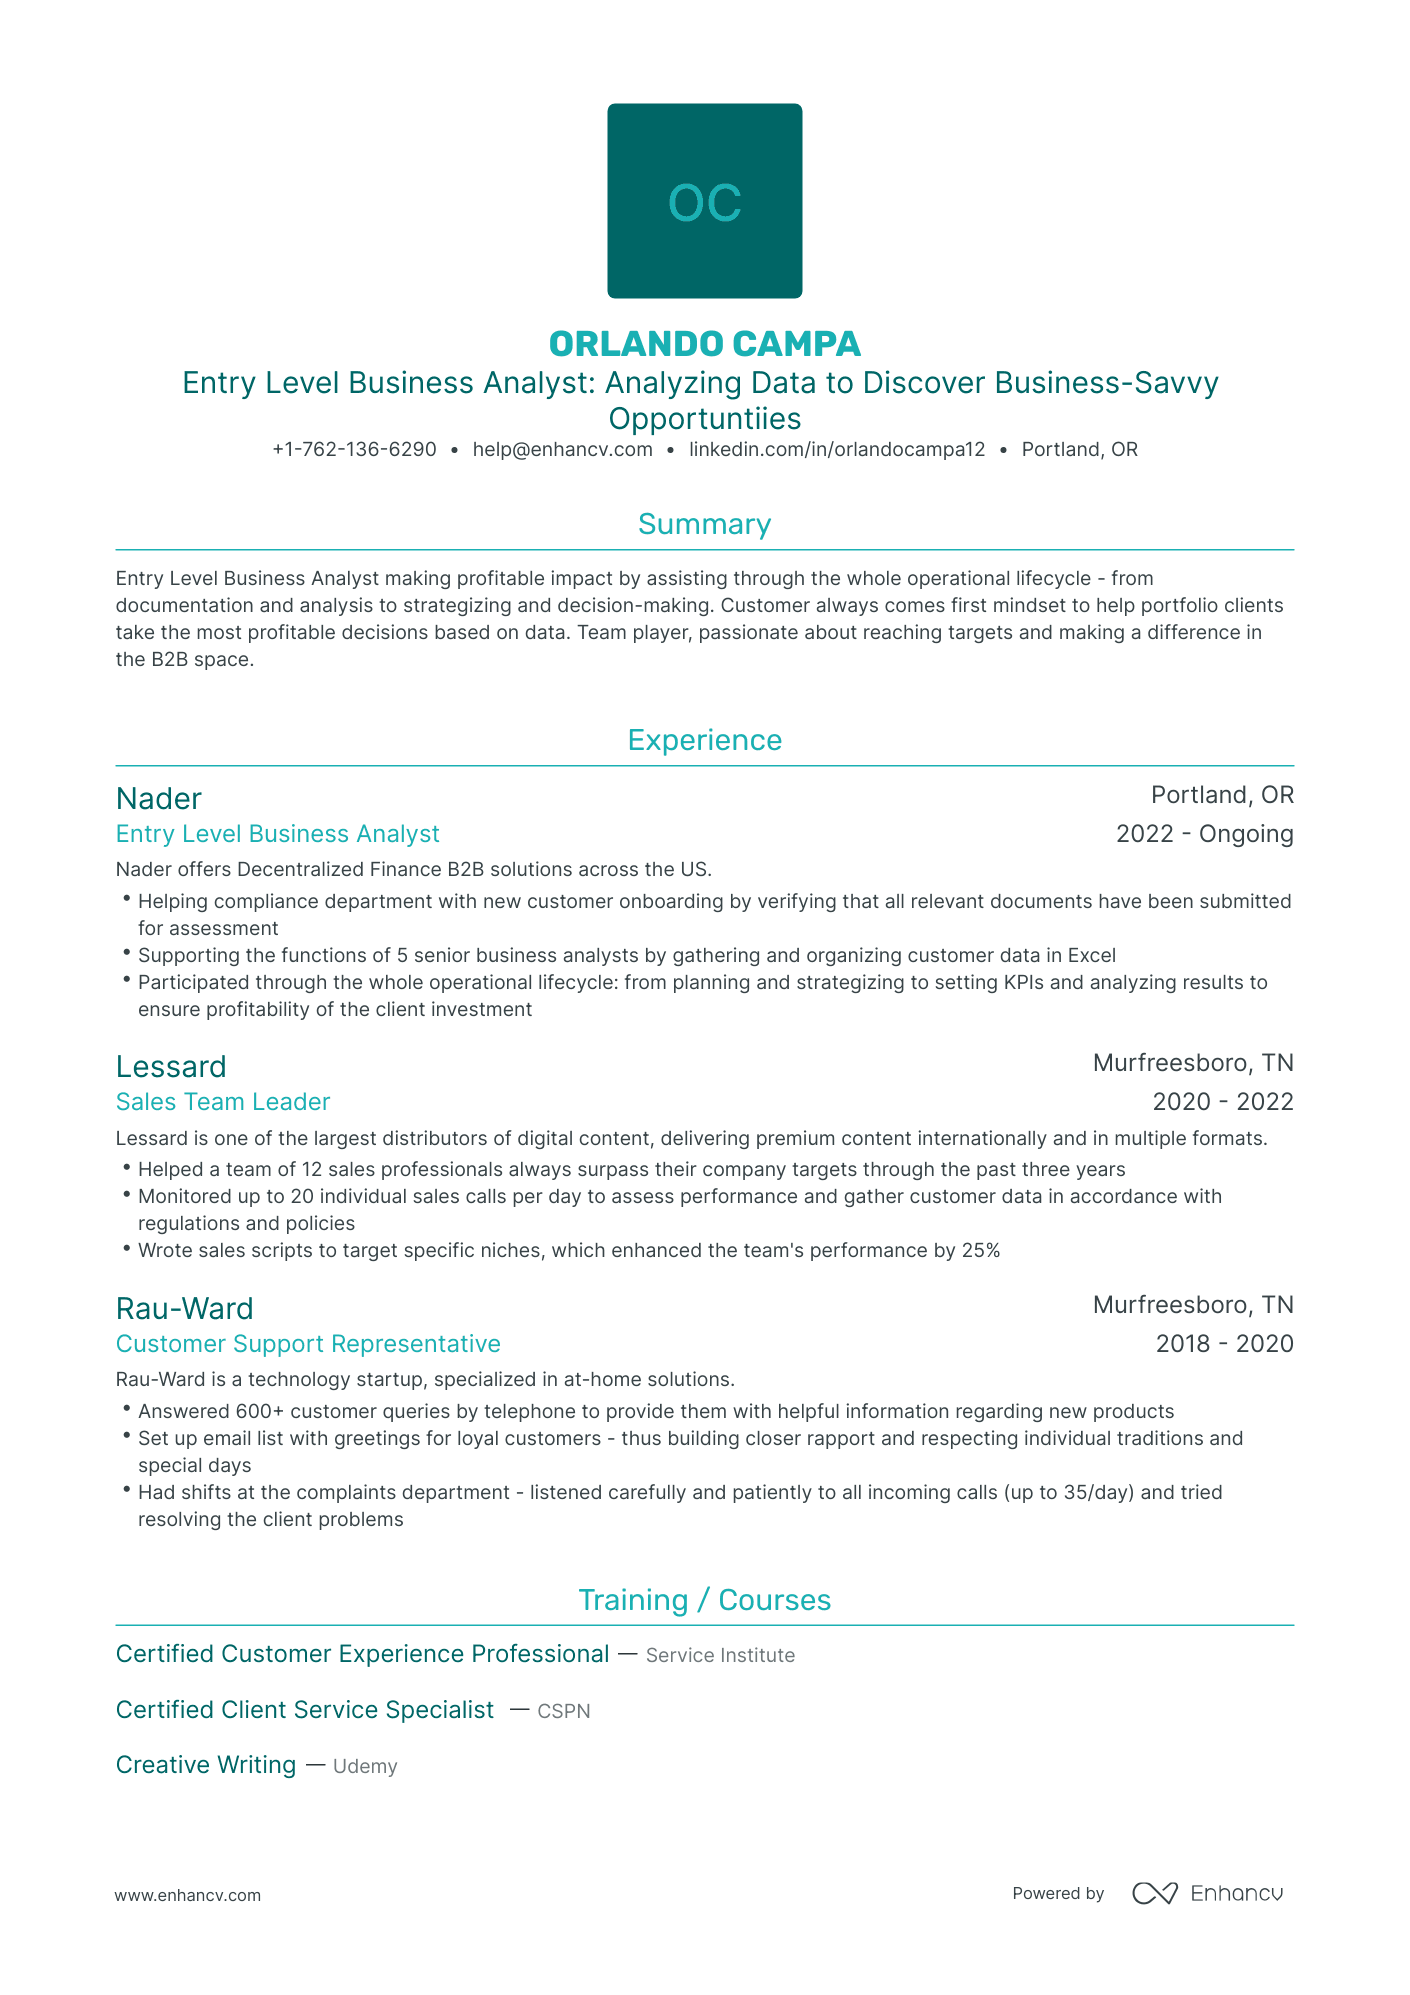 Traditional Entry Level Business Analyst Resume Template